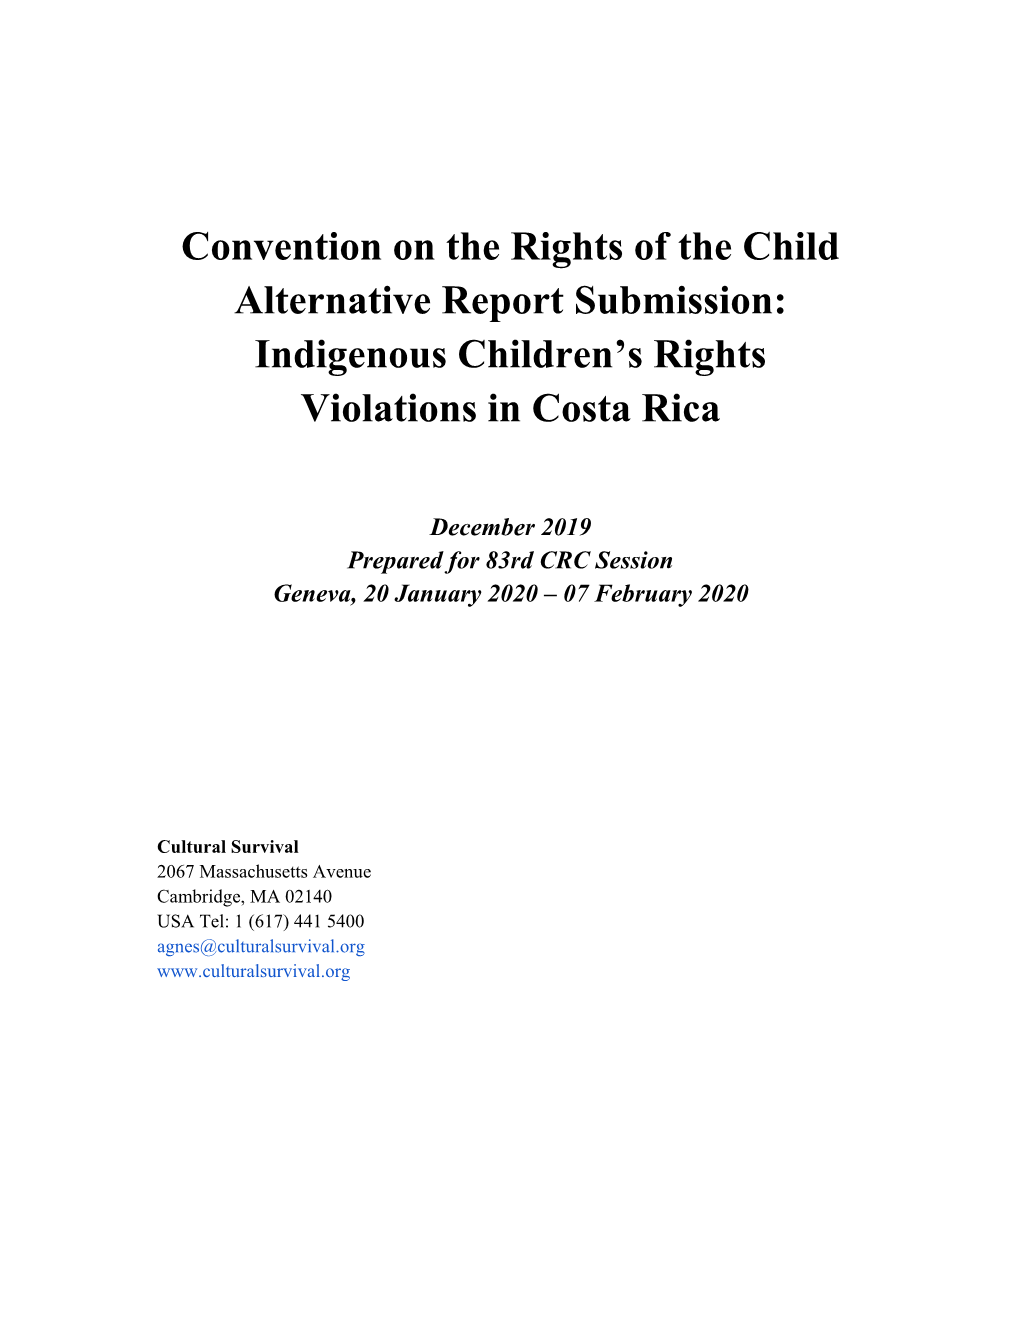 Indigenous Children's Rights Violations in Costa Rica